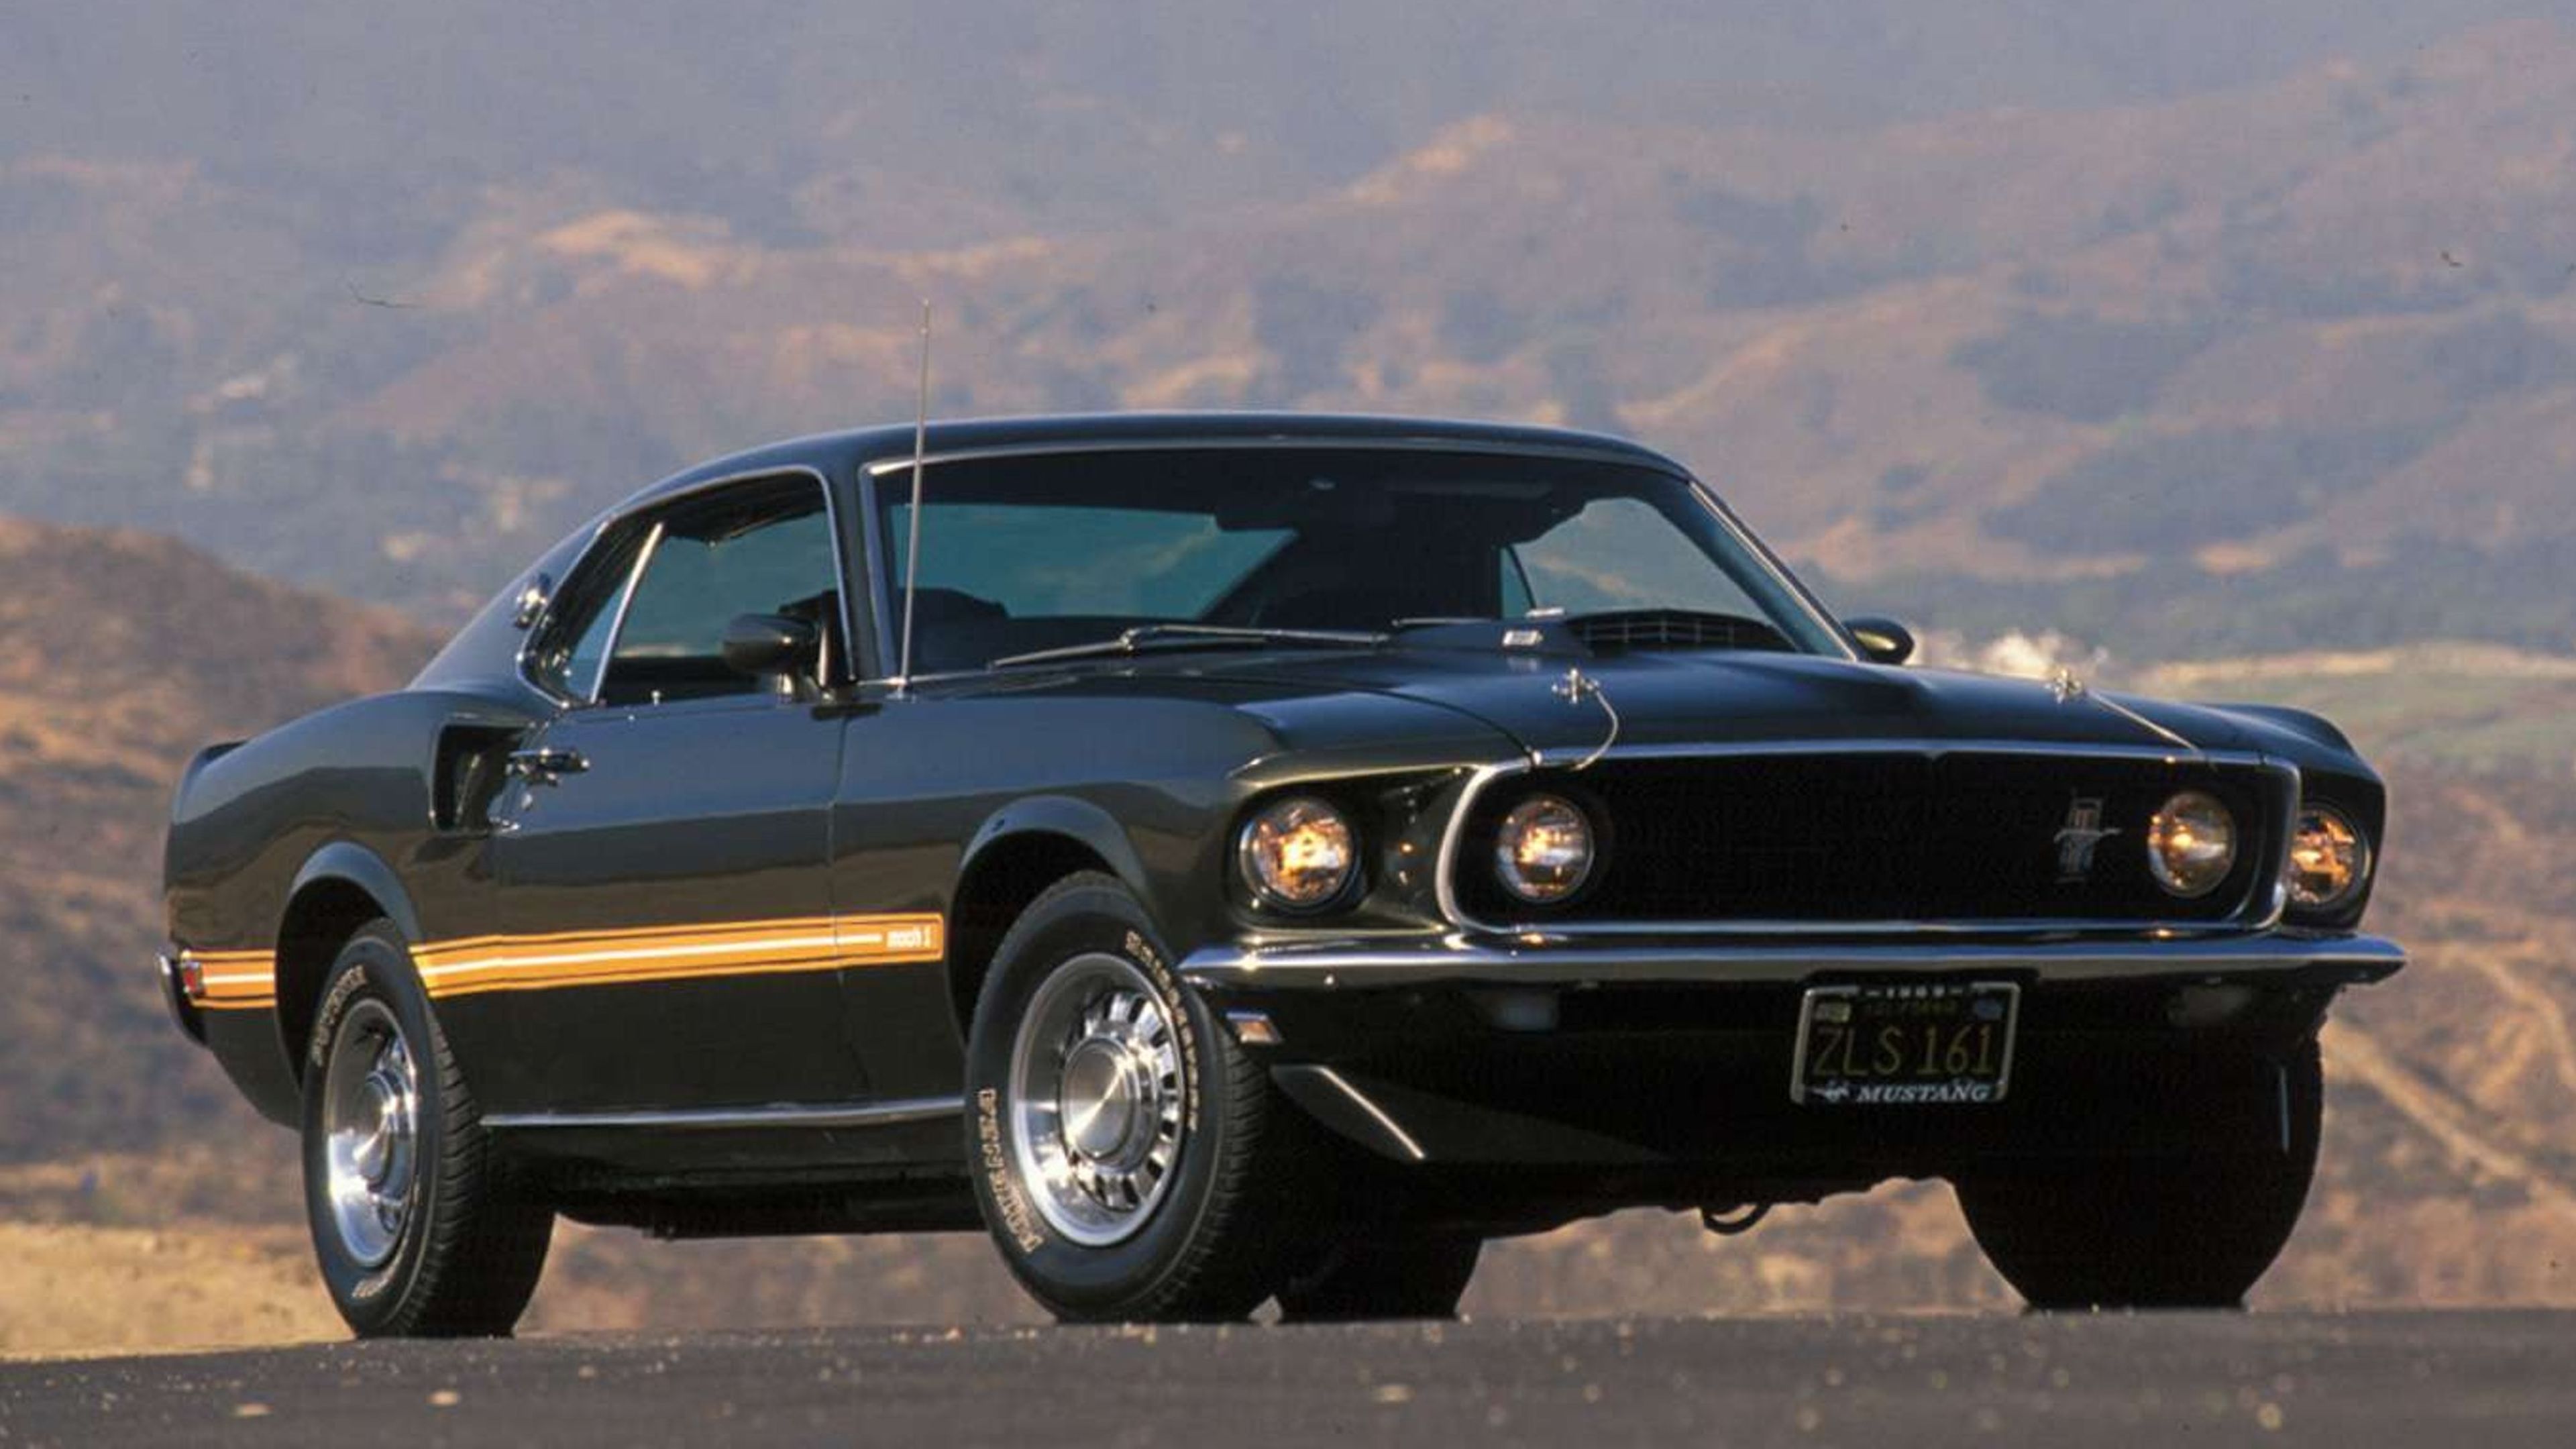 historia-ford-mustang-60-anos-3306696.jp